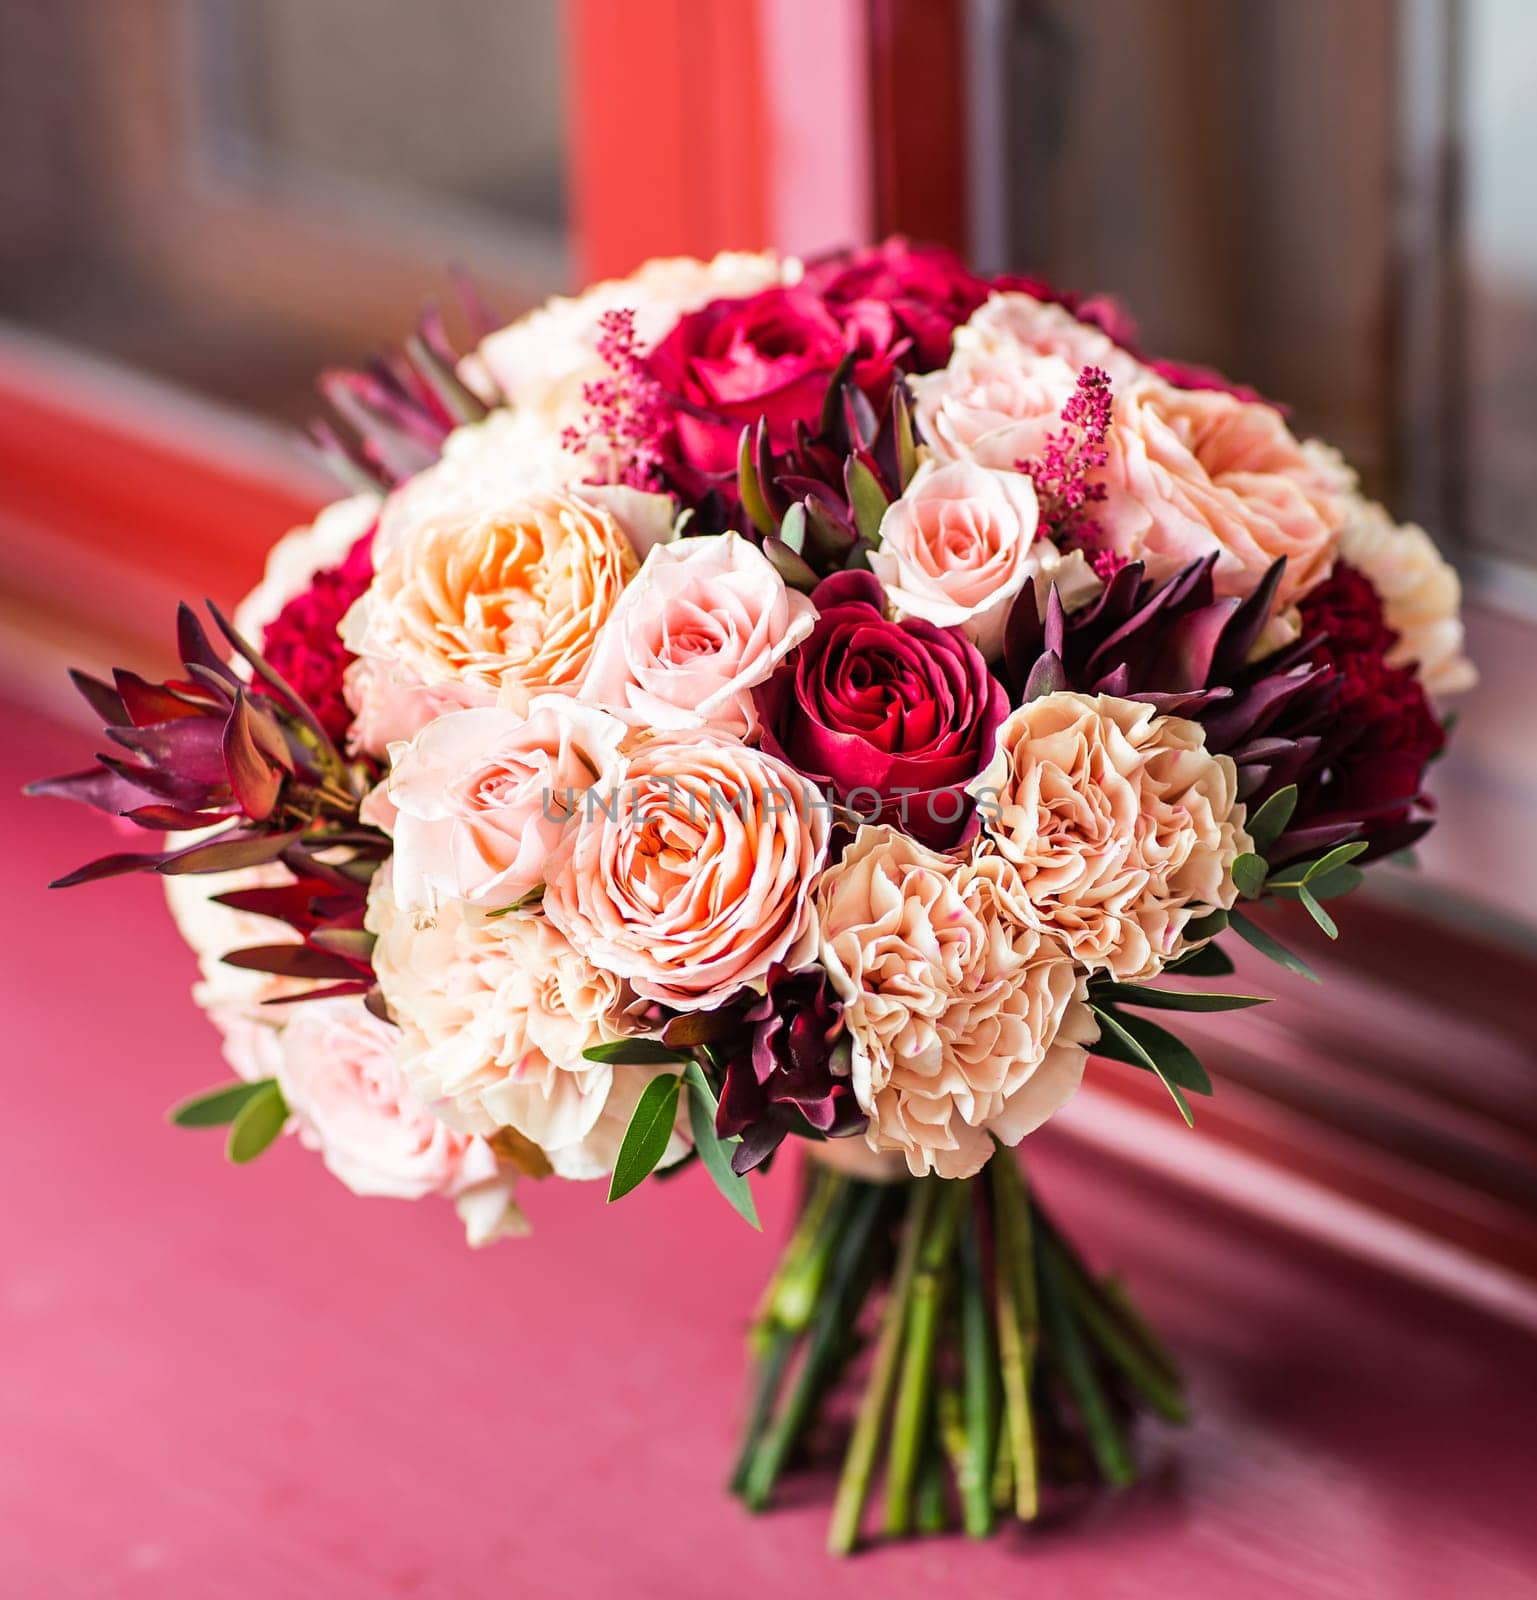 close up of wedding bouquet by Satura86